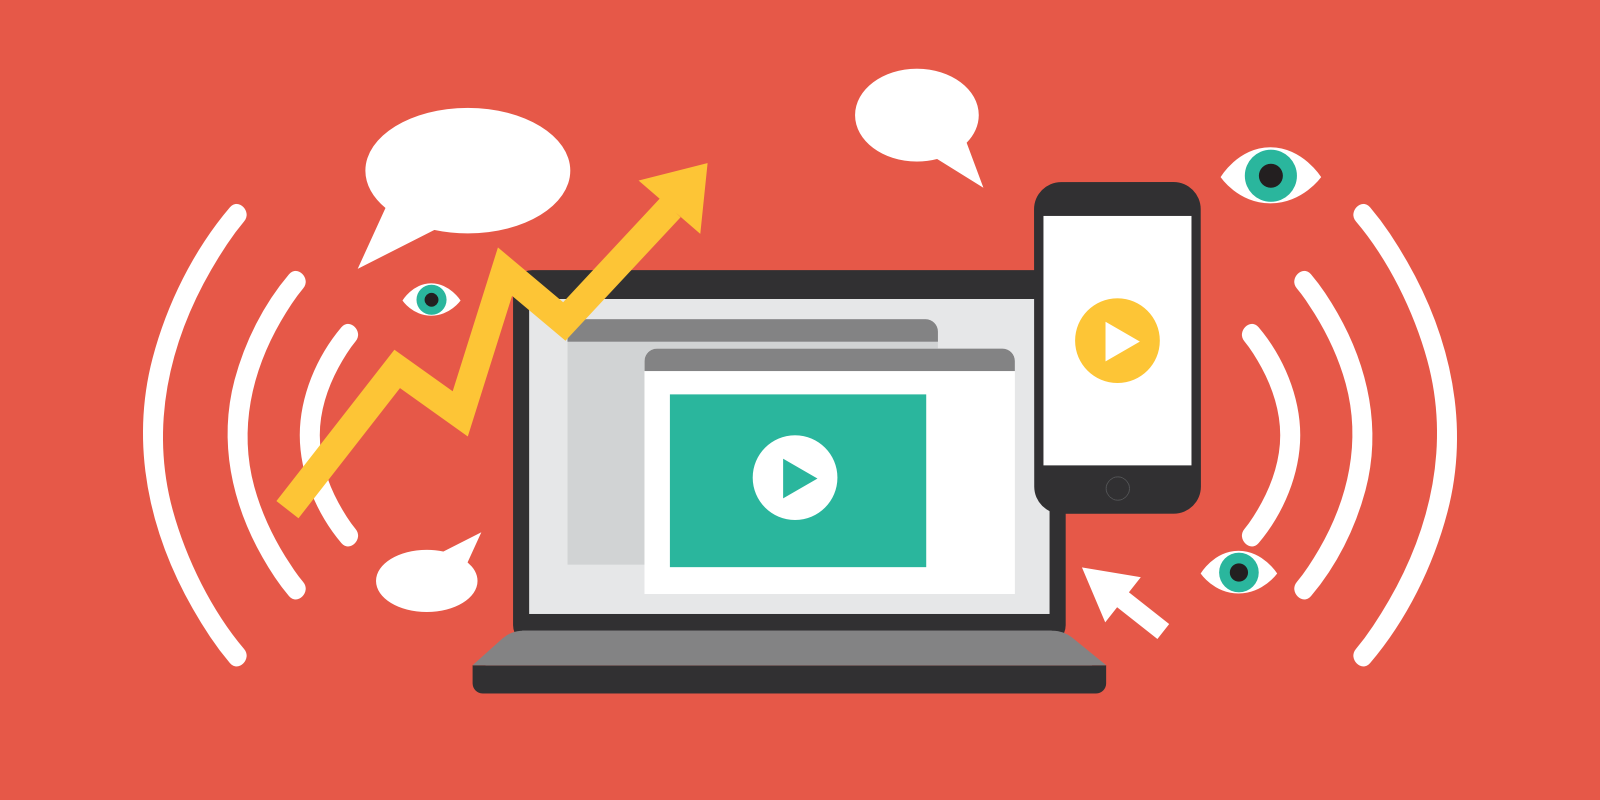 6 Video Marketing Tactics To Improve Your Lead Generation